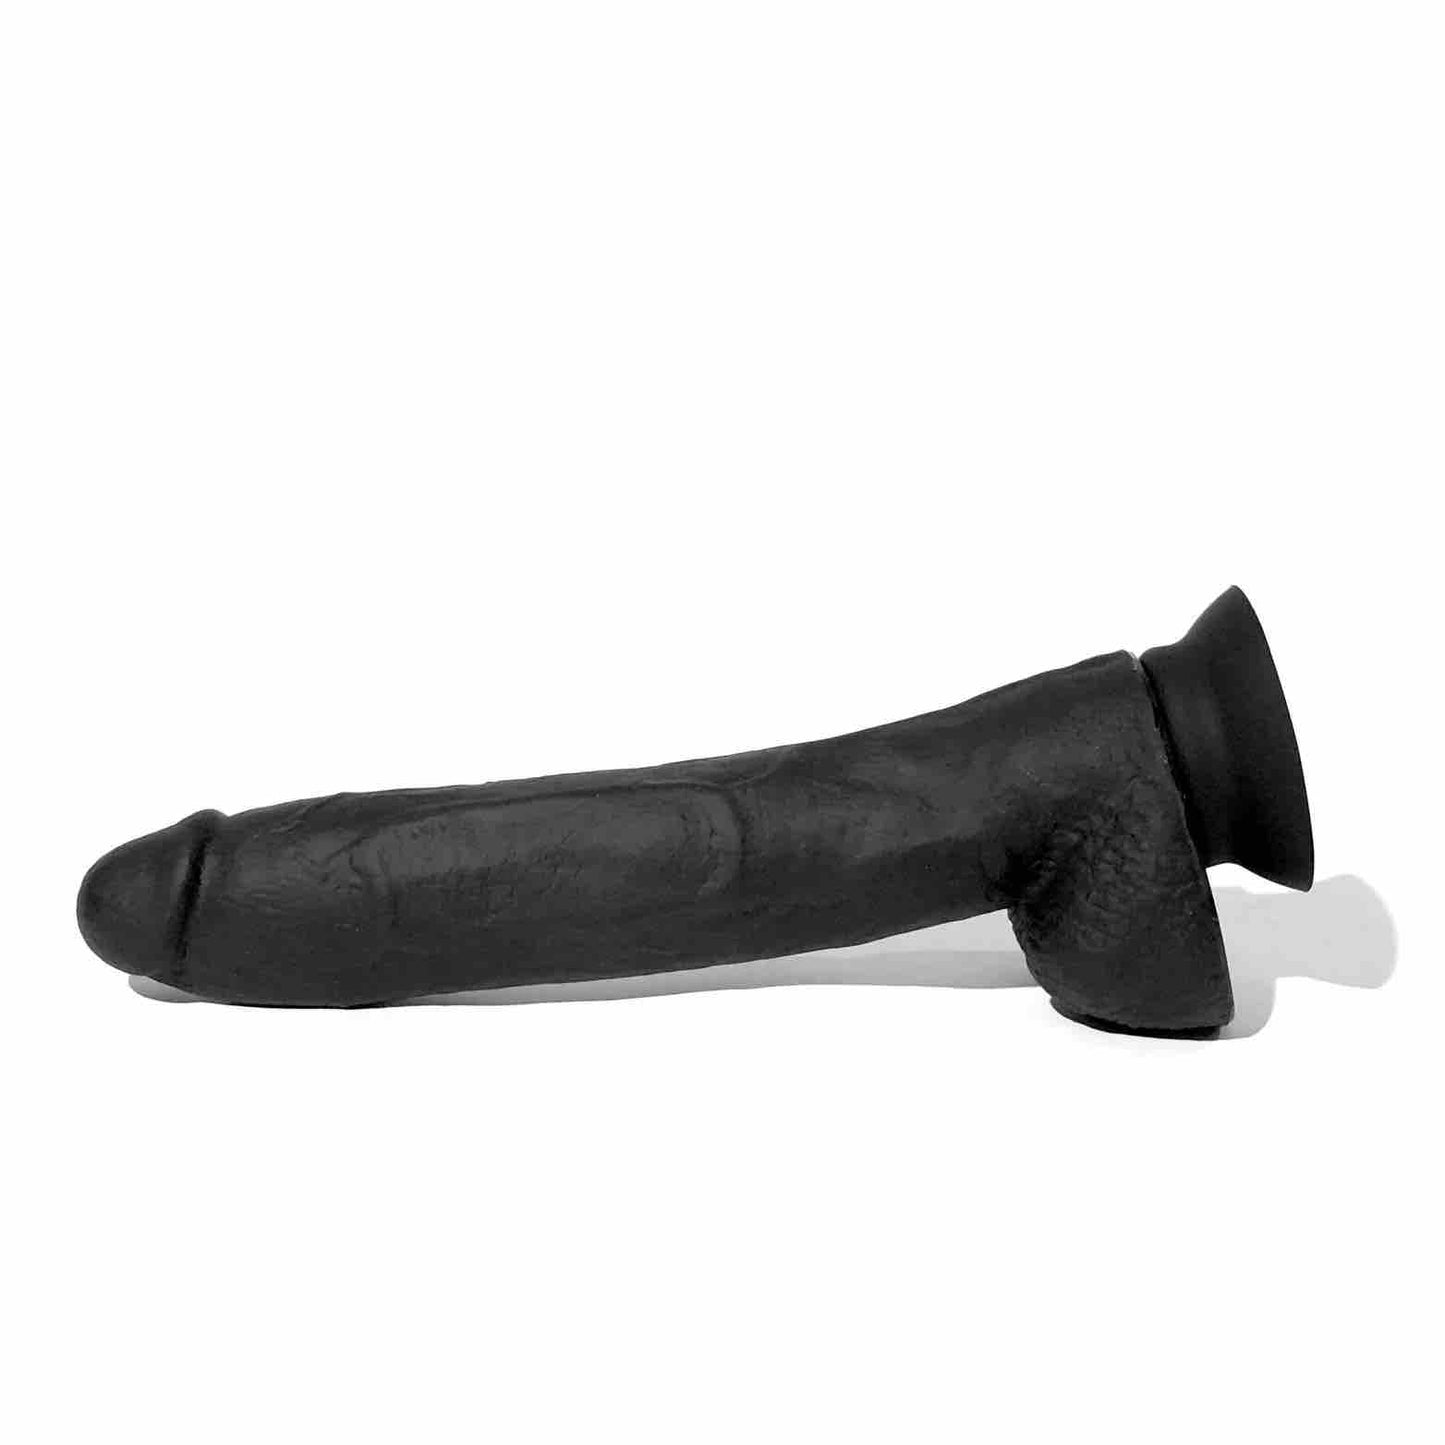 The 10 inch Boneyard Silicone Cock laying on its side with the suction cup attached.